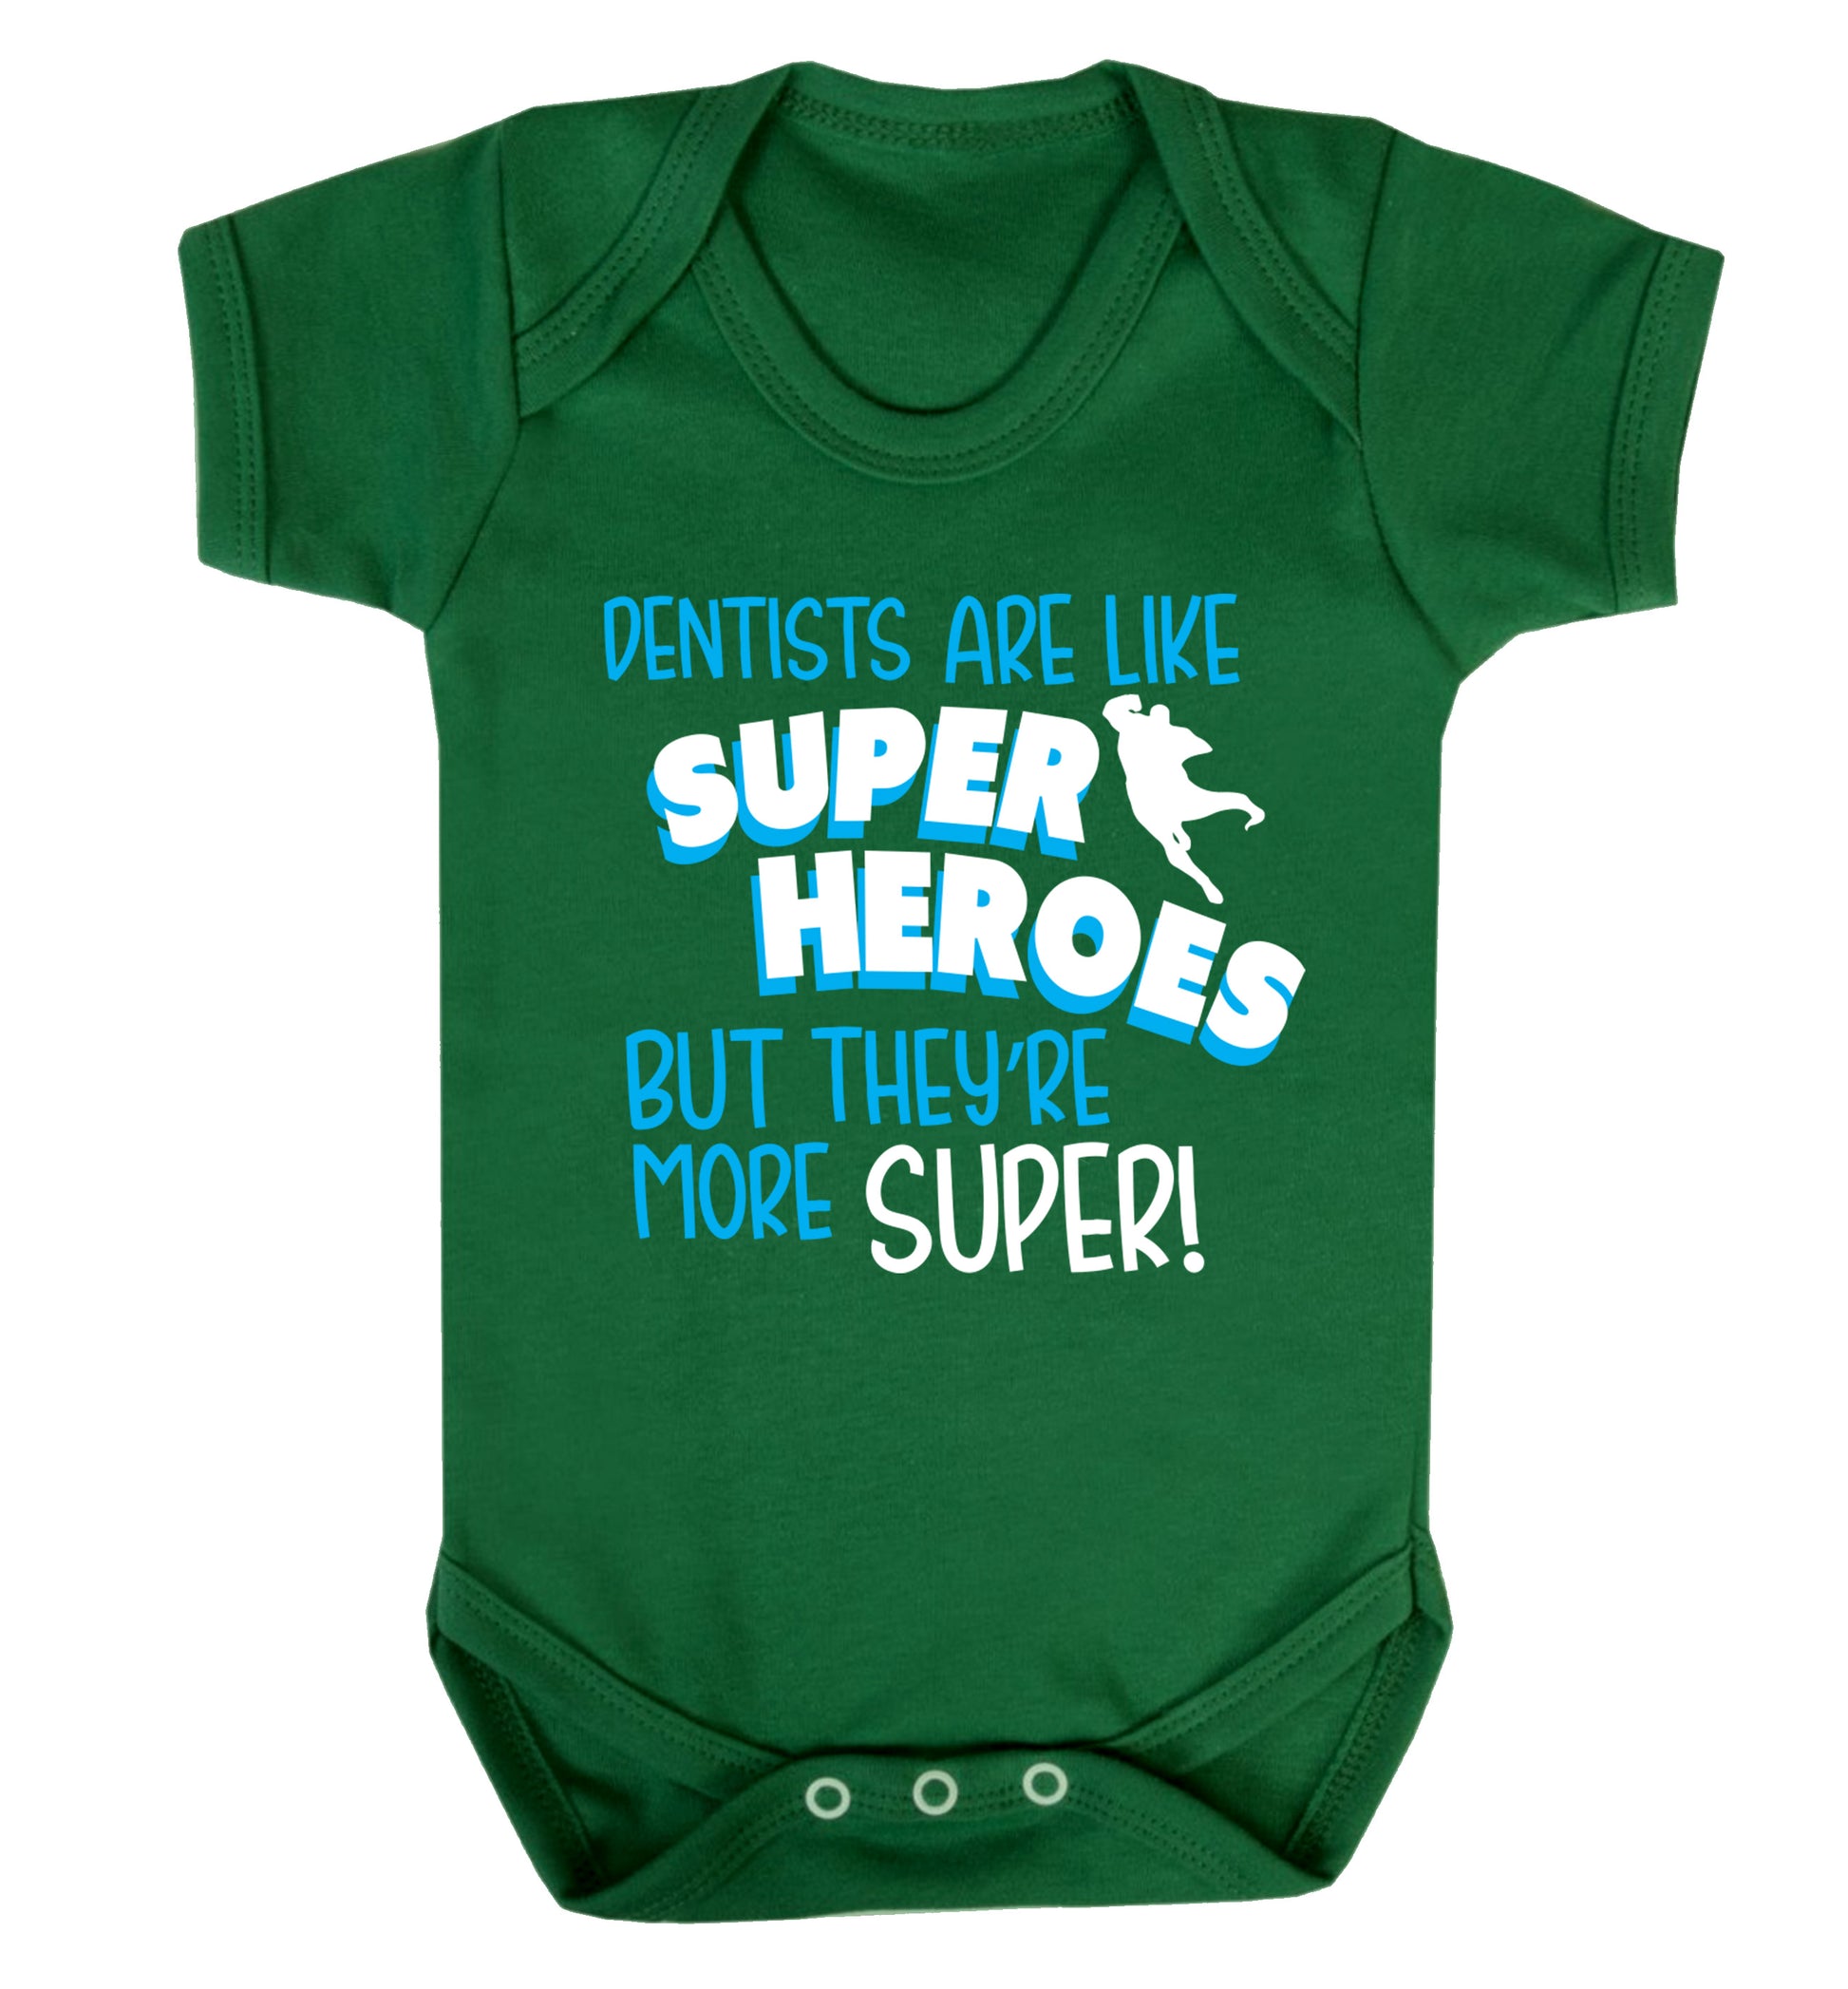 Dentists are like superheros but they're more super Baby Vest green 18-24 months